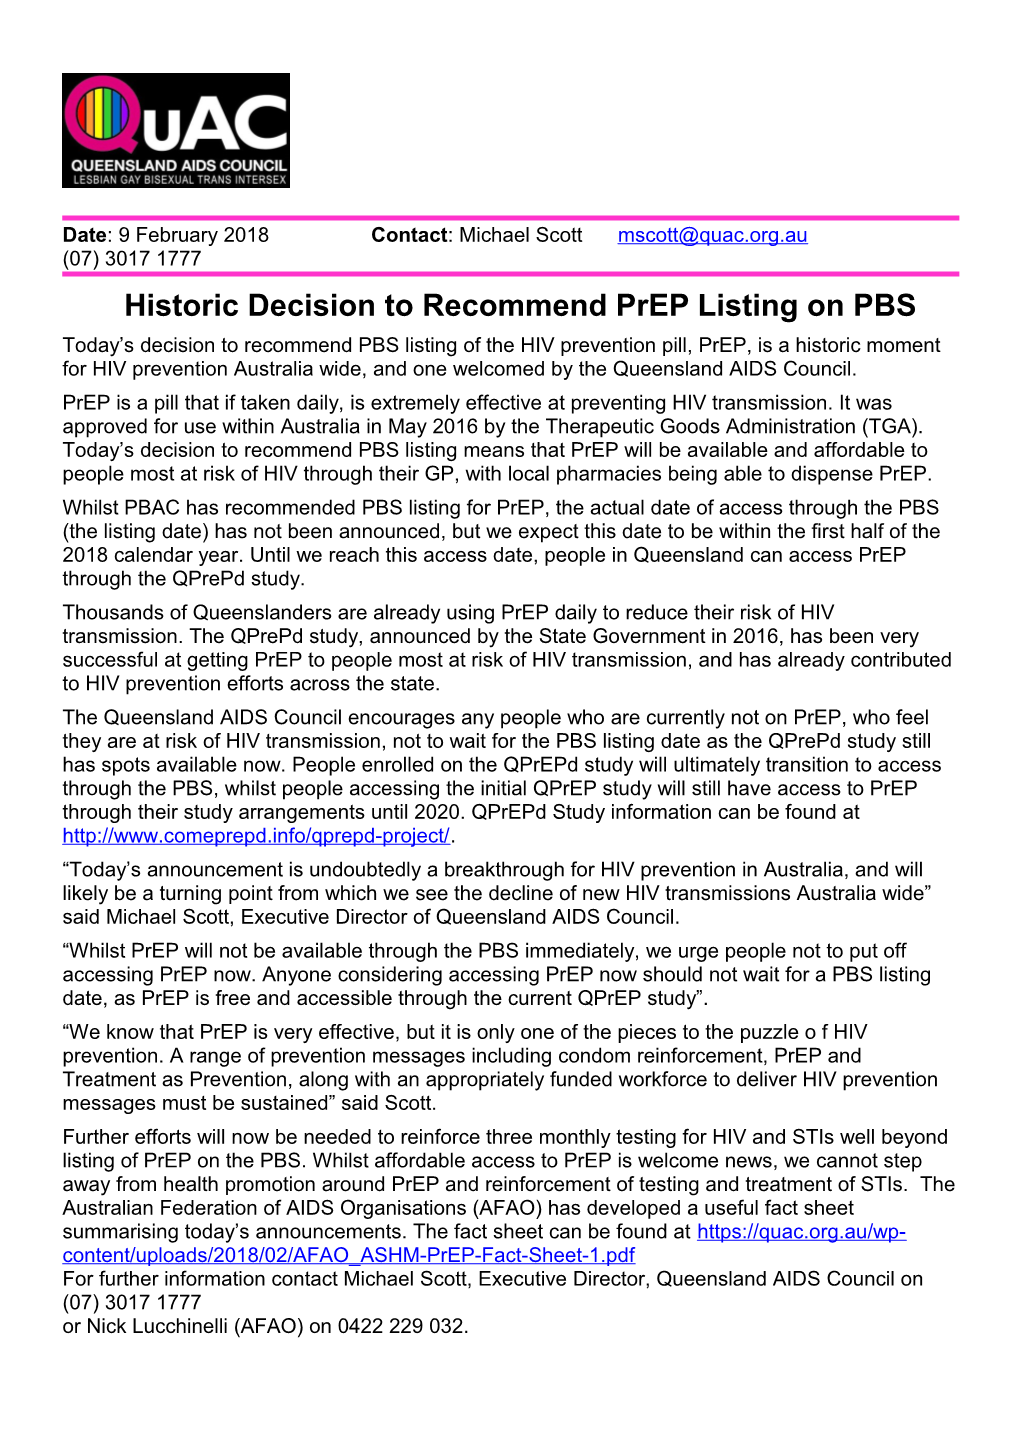 Historic Decision to Recommend Prep Listing on PBS